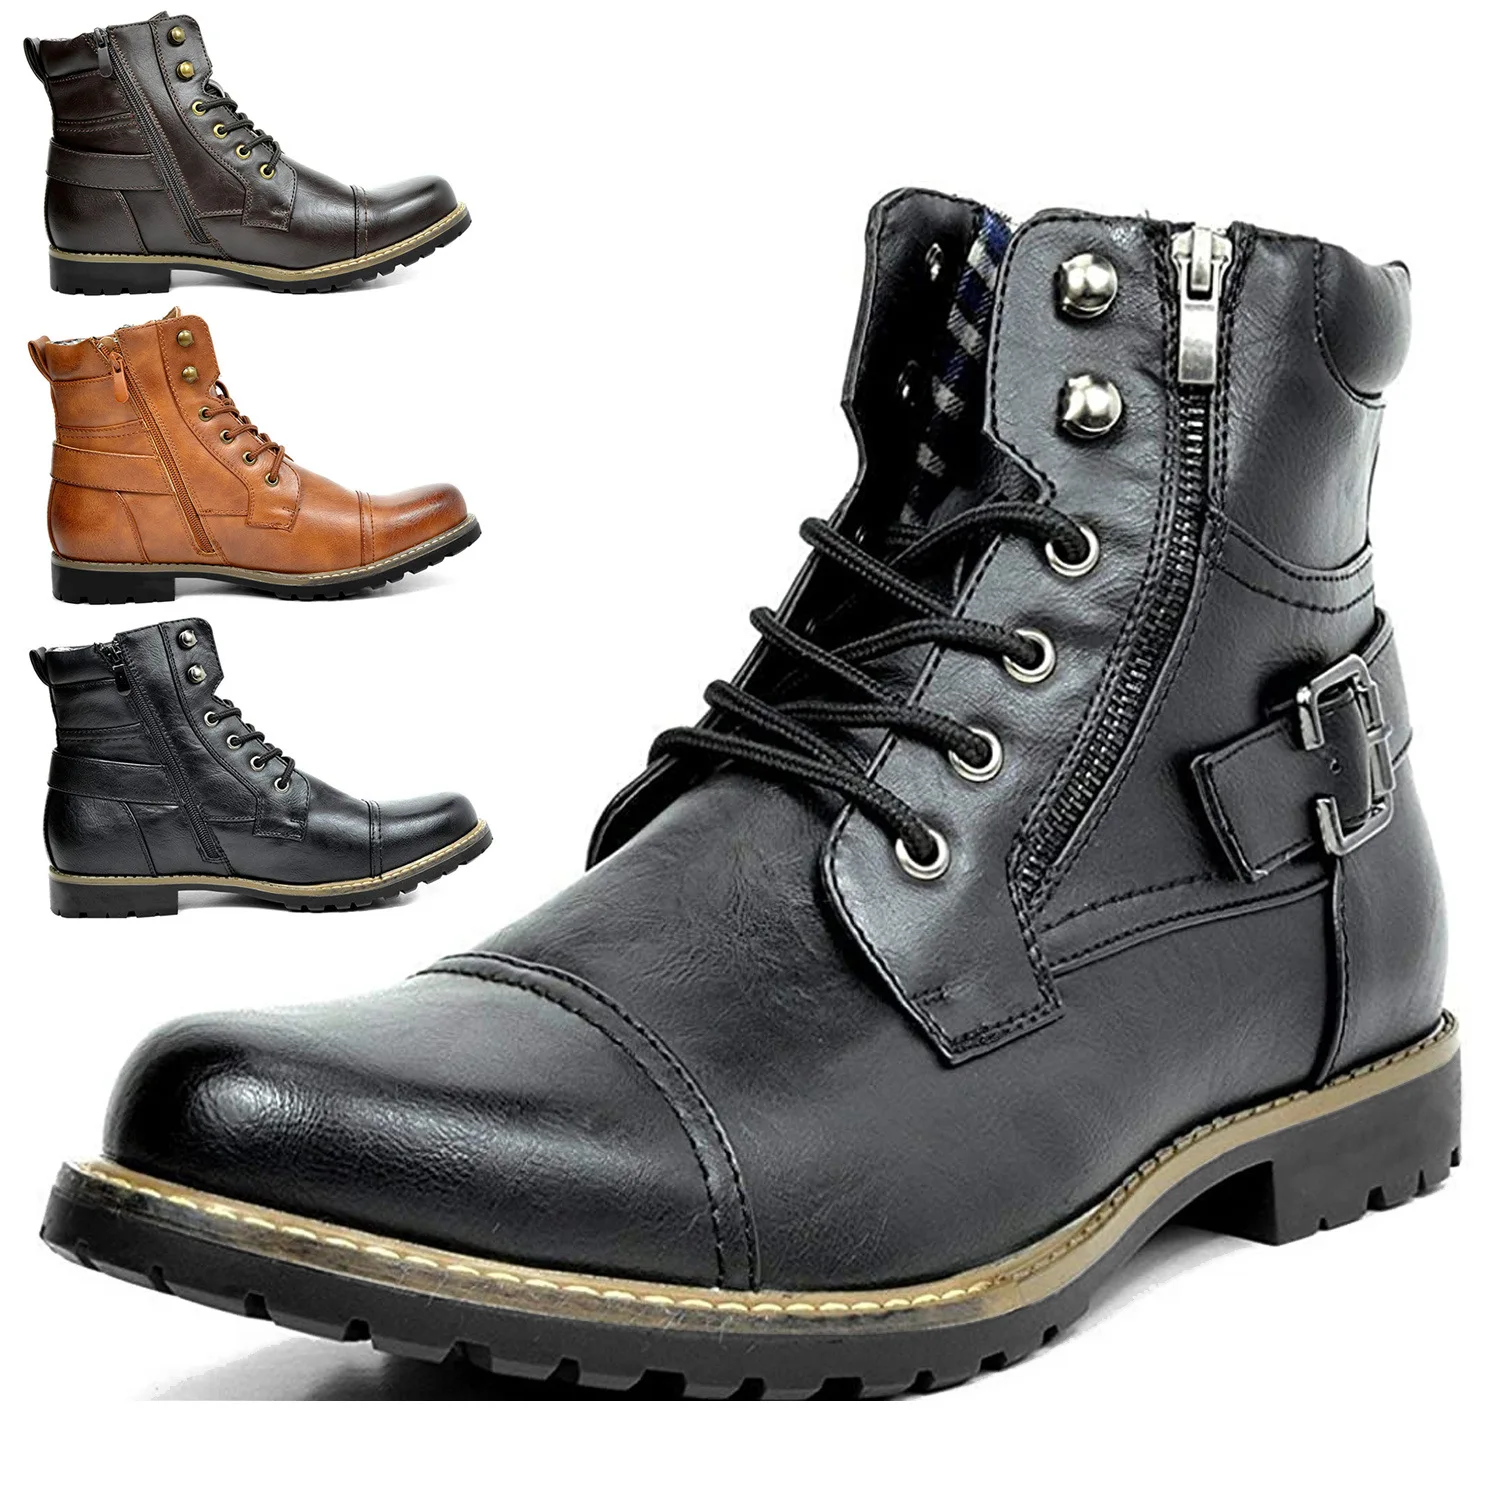 

2023 New Fashion Knight Boots Metal Double Zipper Men's Leather Boots Motorcycle Boots Sports Men's Boots Zapatillas Hombre